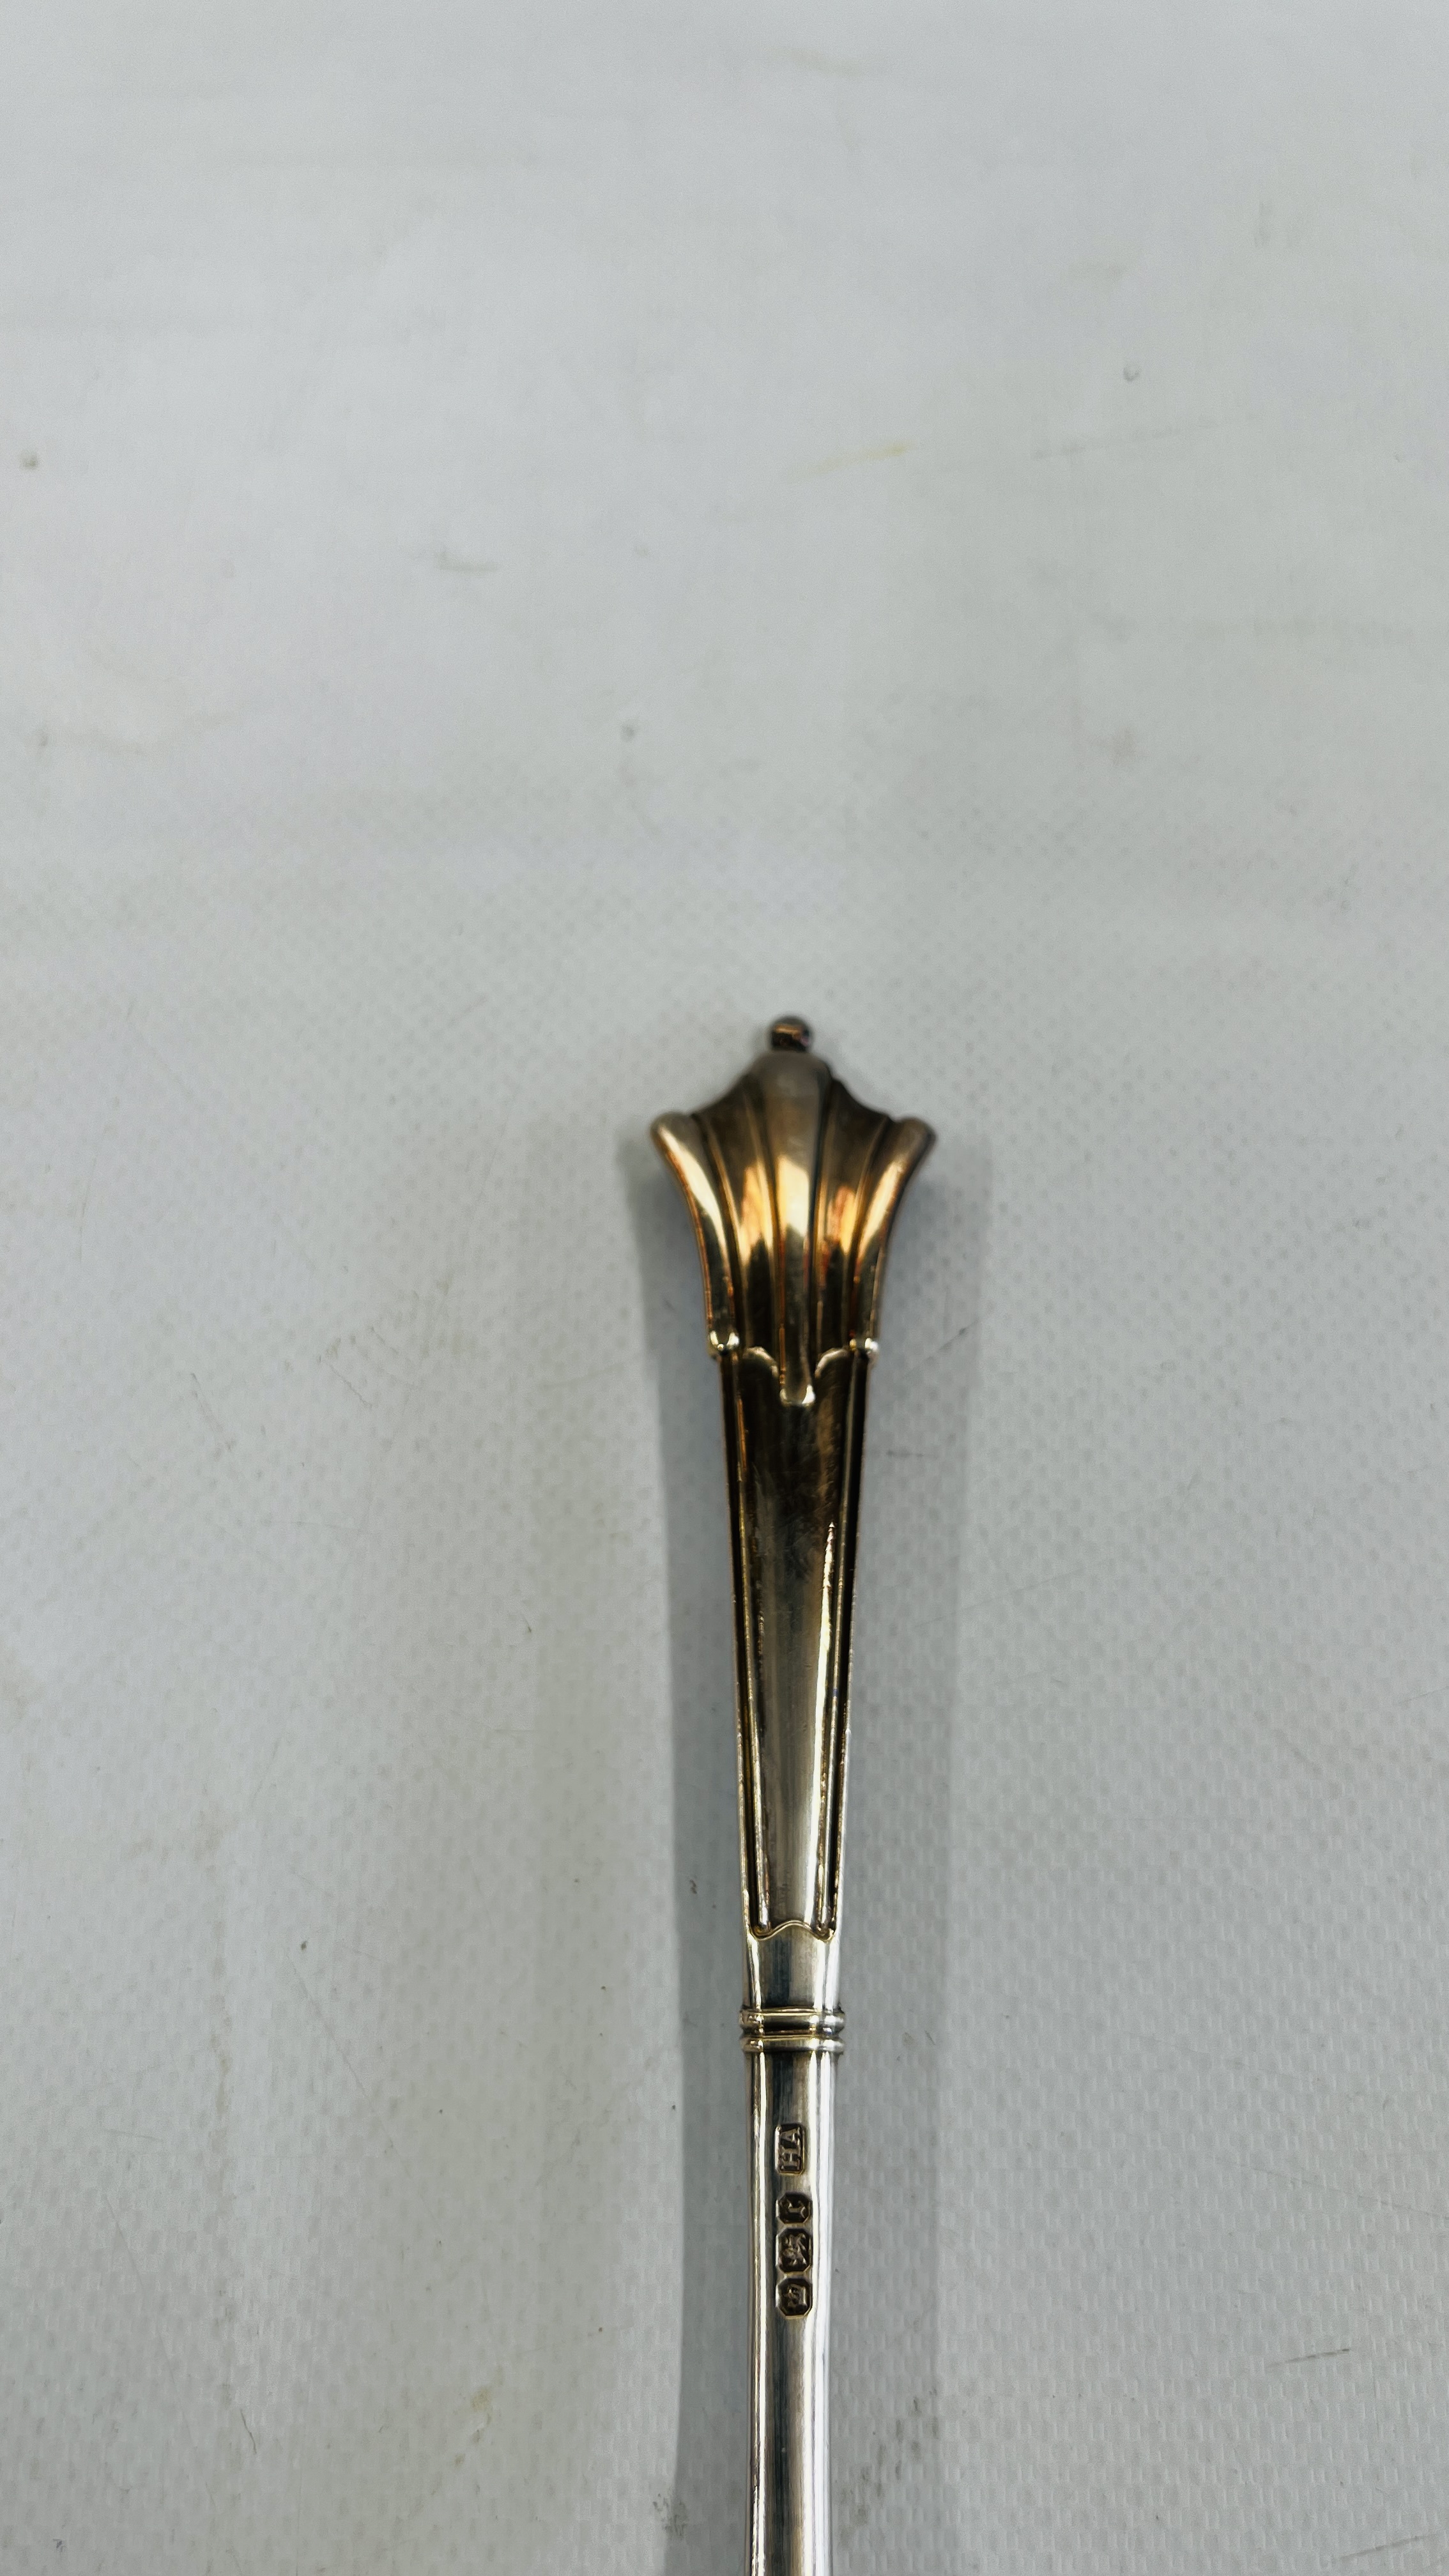 AN ANTIQUE VICTORIAN SILVER SPOON, SHEFFIELD ASSAY 1895, MAKER H. ATKINS - L 22.5CM. - Image 7 of 8